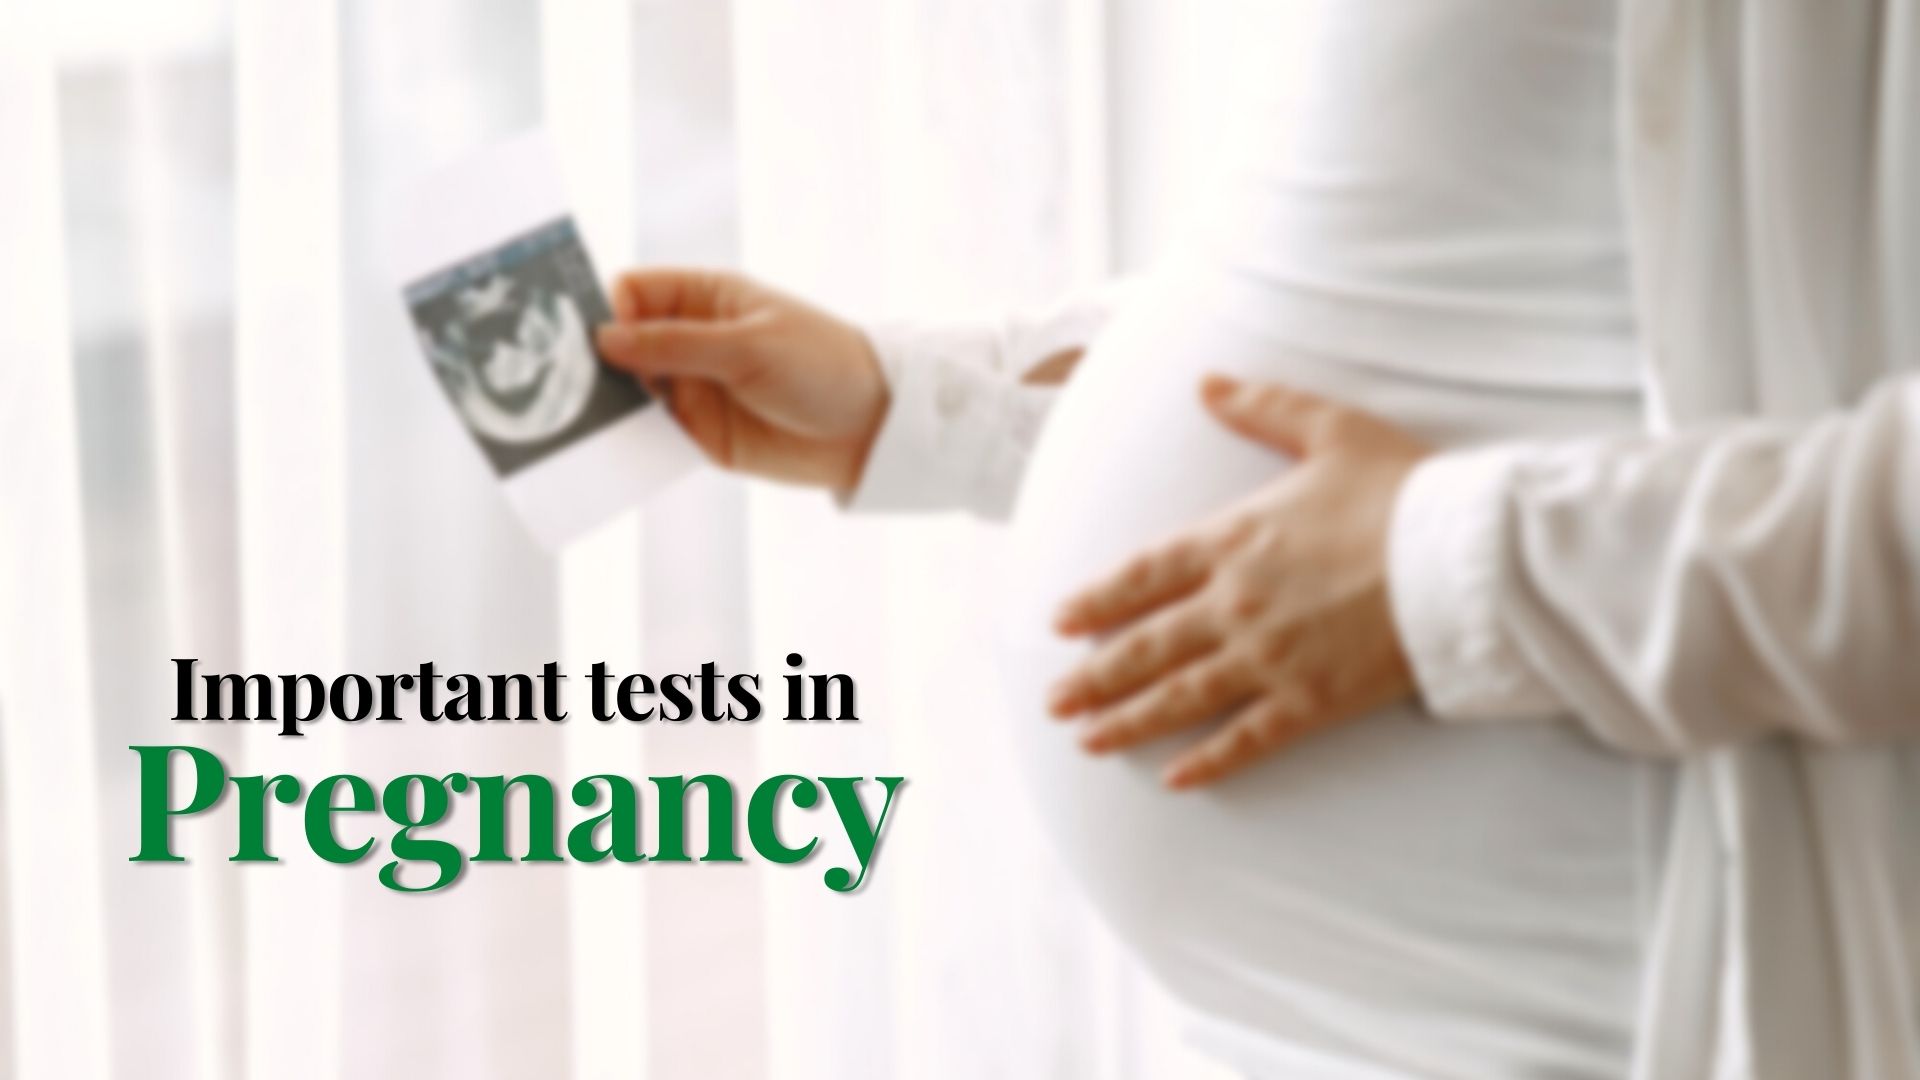 Important tests in pregnancy